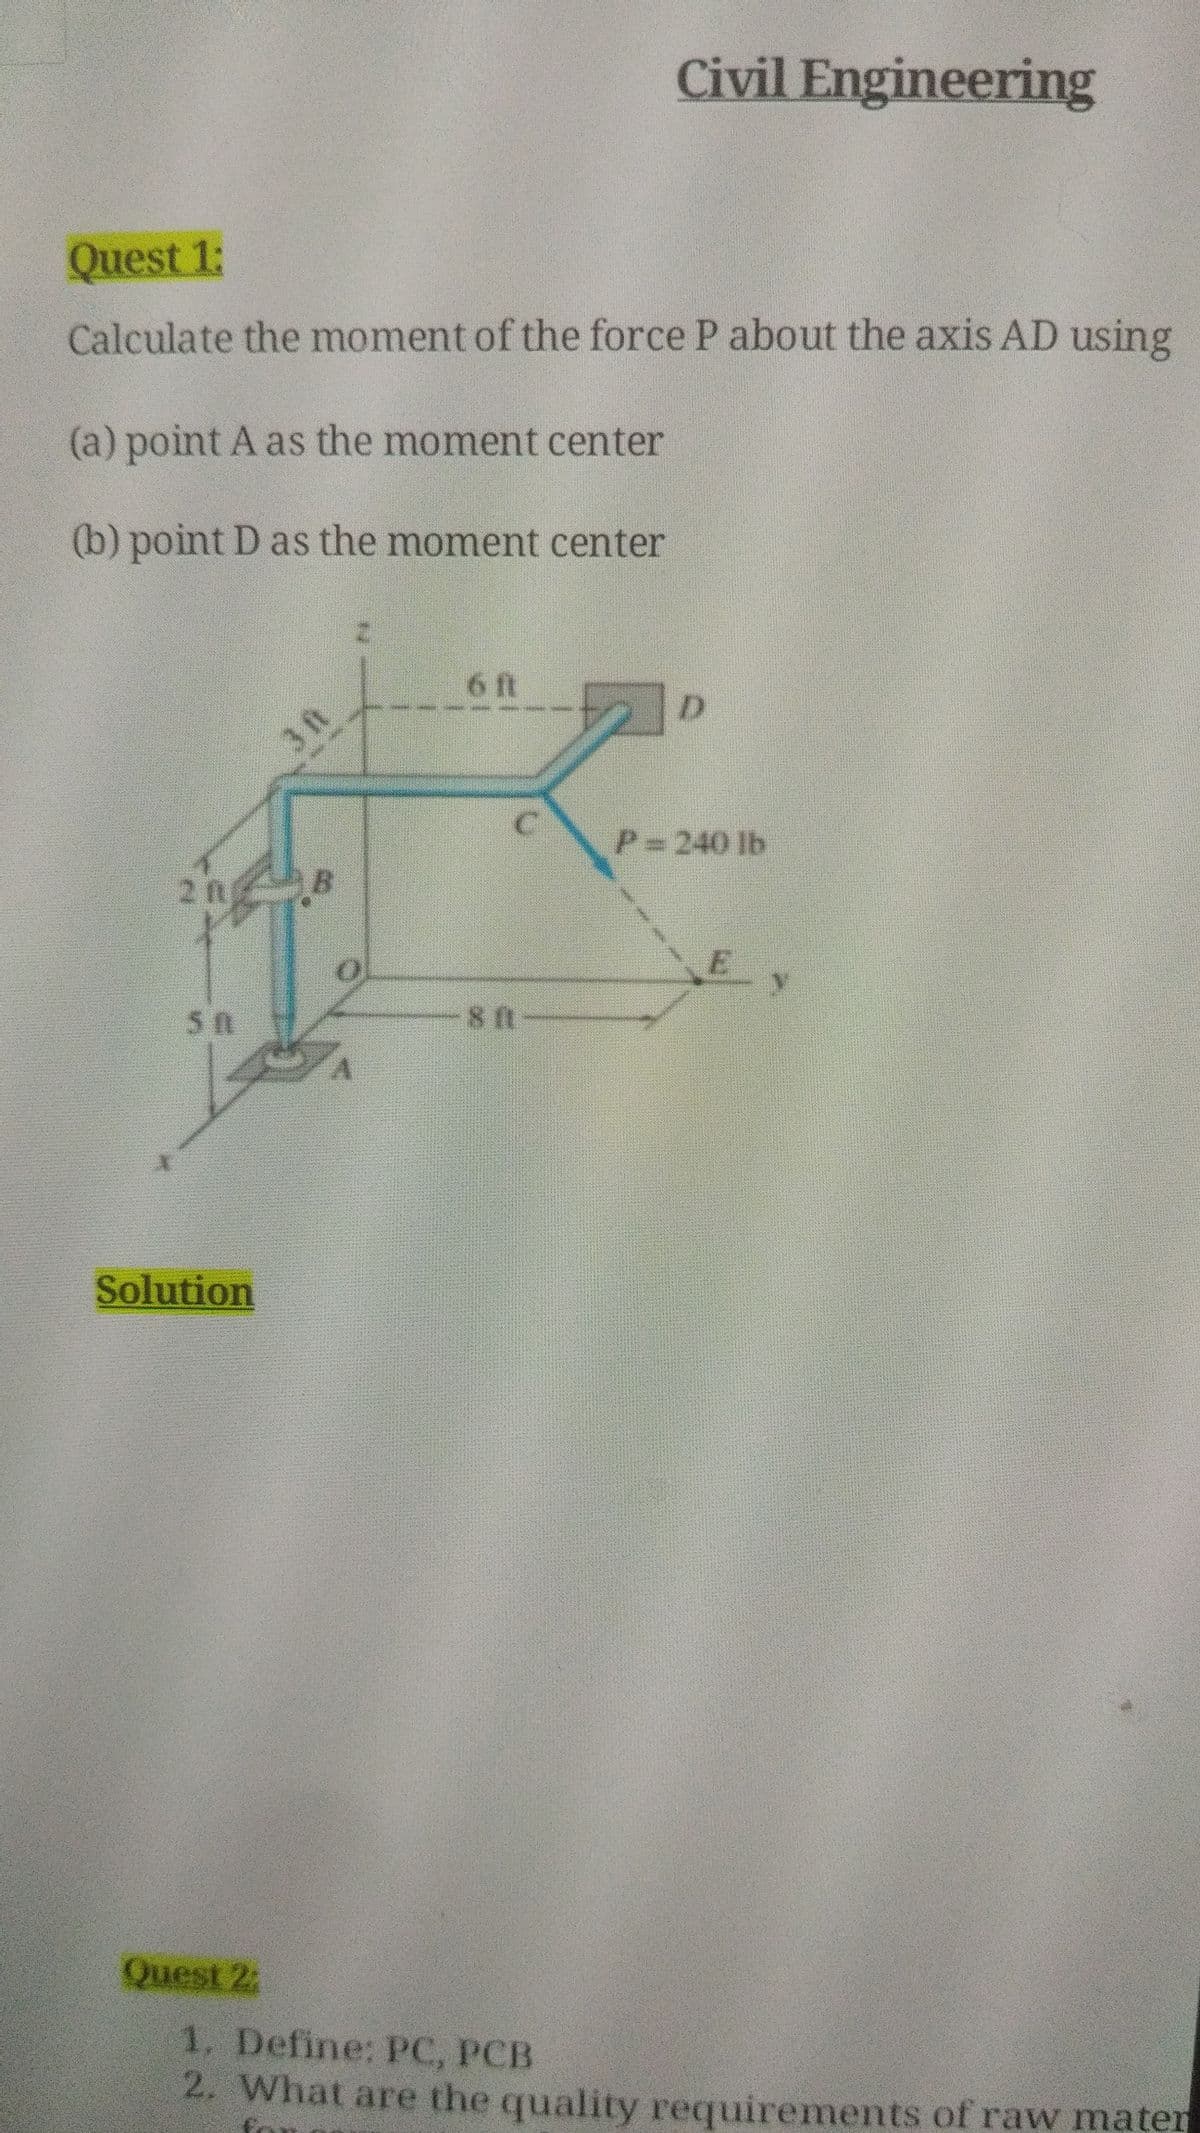 Civil Engineering
Quest 1:
Calculate the moment of the force P about the axis AD using
(a) point A as the moment center
(b) point D as the moment center
6 ft
3 ft
P=240 lb
2 ft
Solution
Quest 2:
1, Define: PC, PCB
2. What are the quality requirements of raw maten
